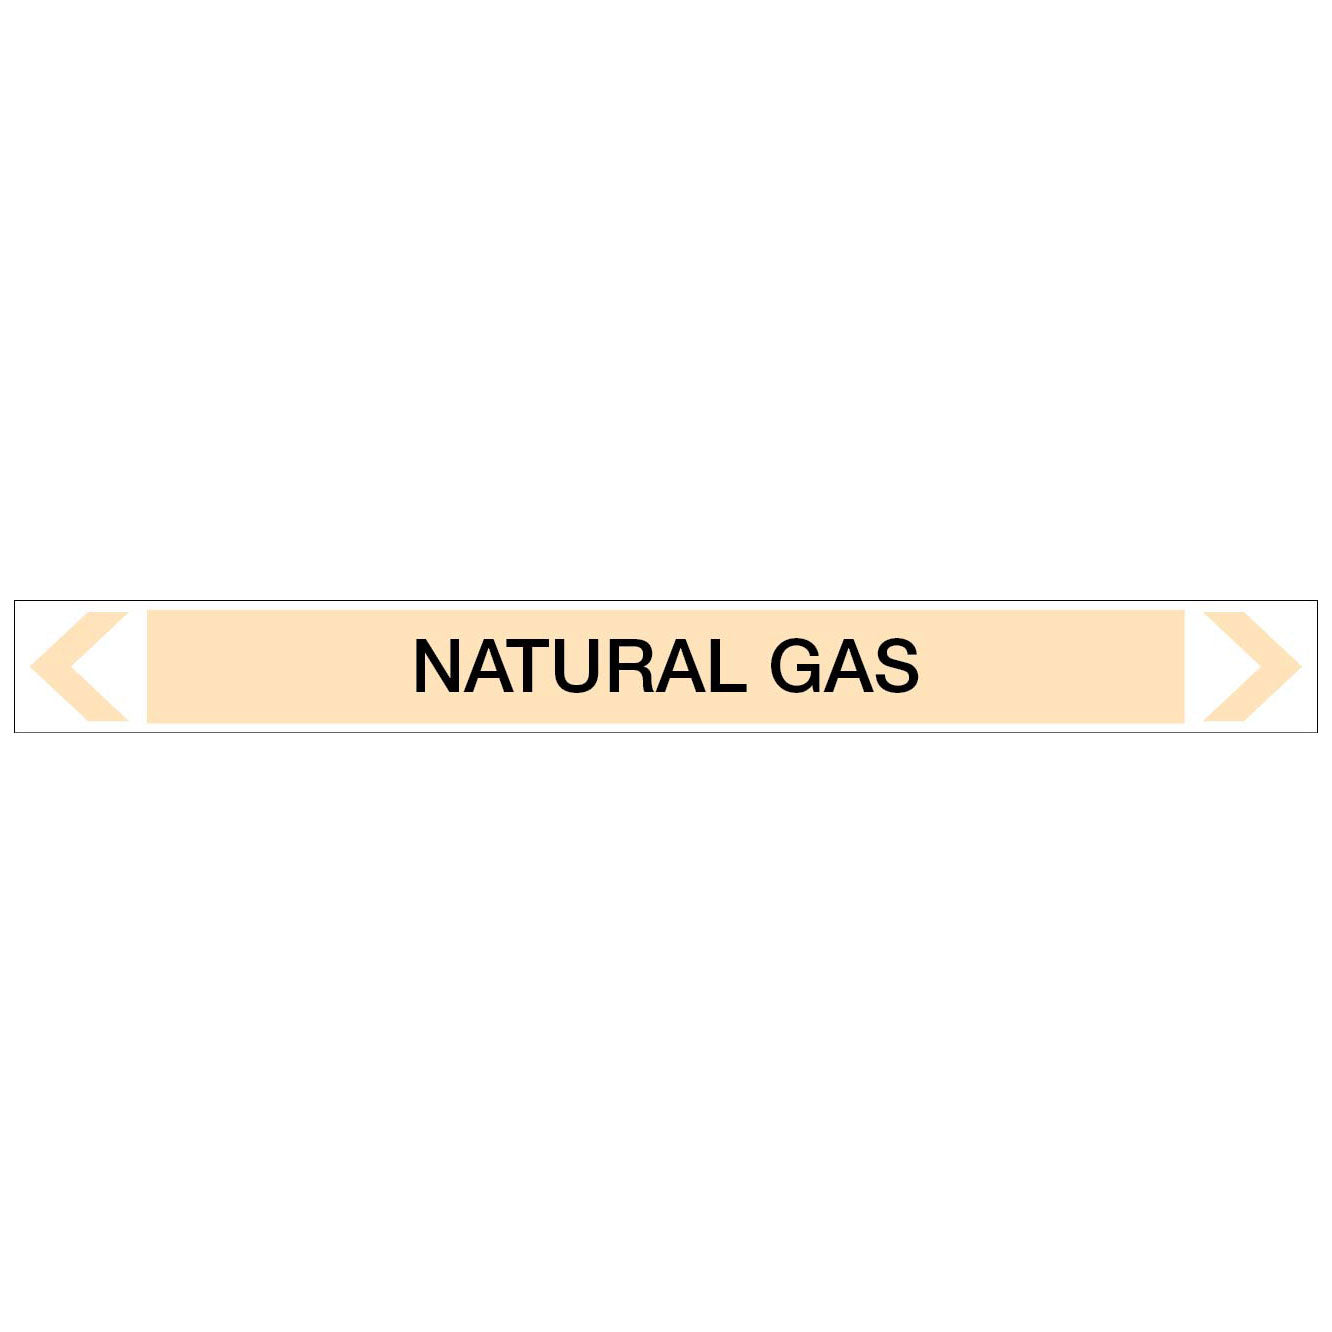 Gases - Natural Gas - Pipe Marker Sticker